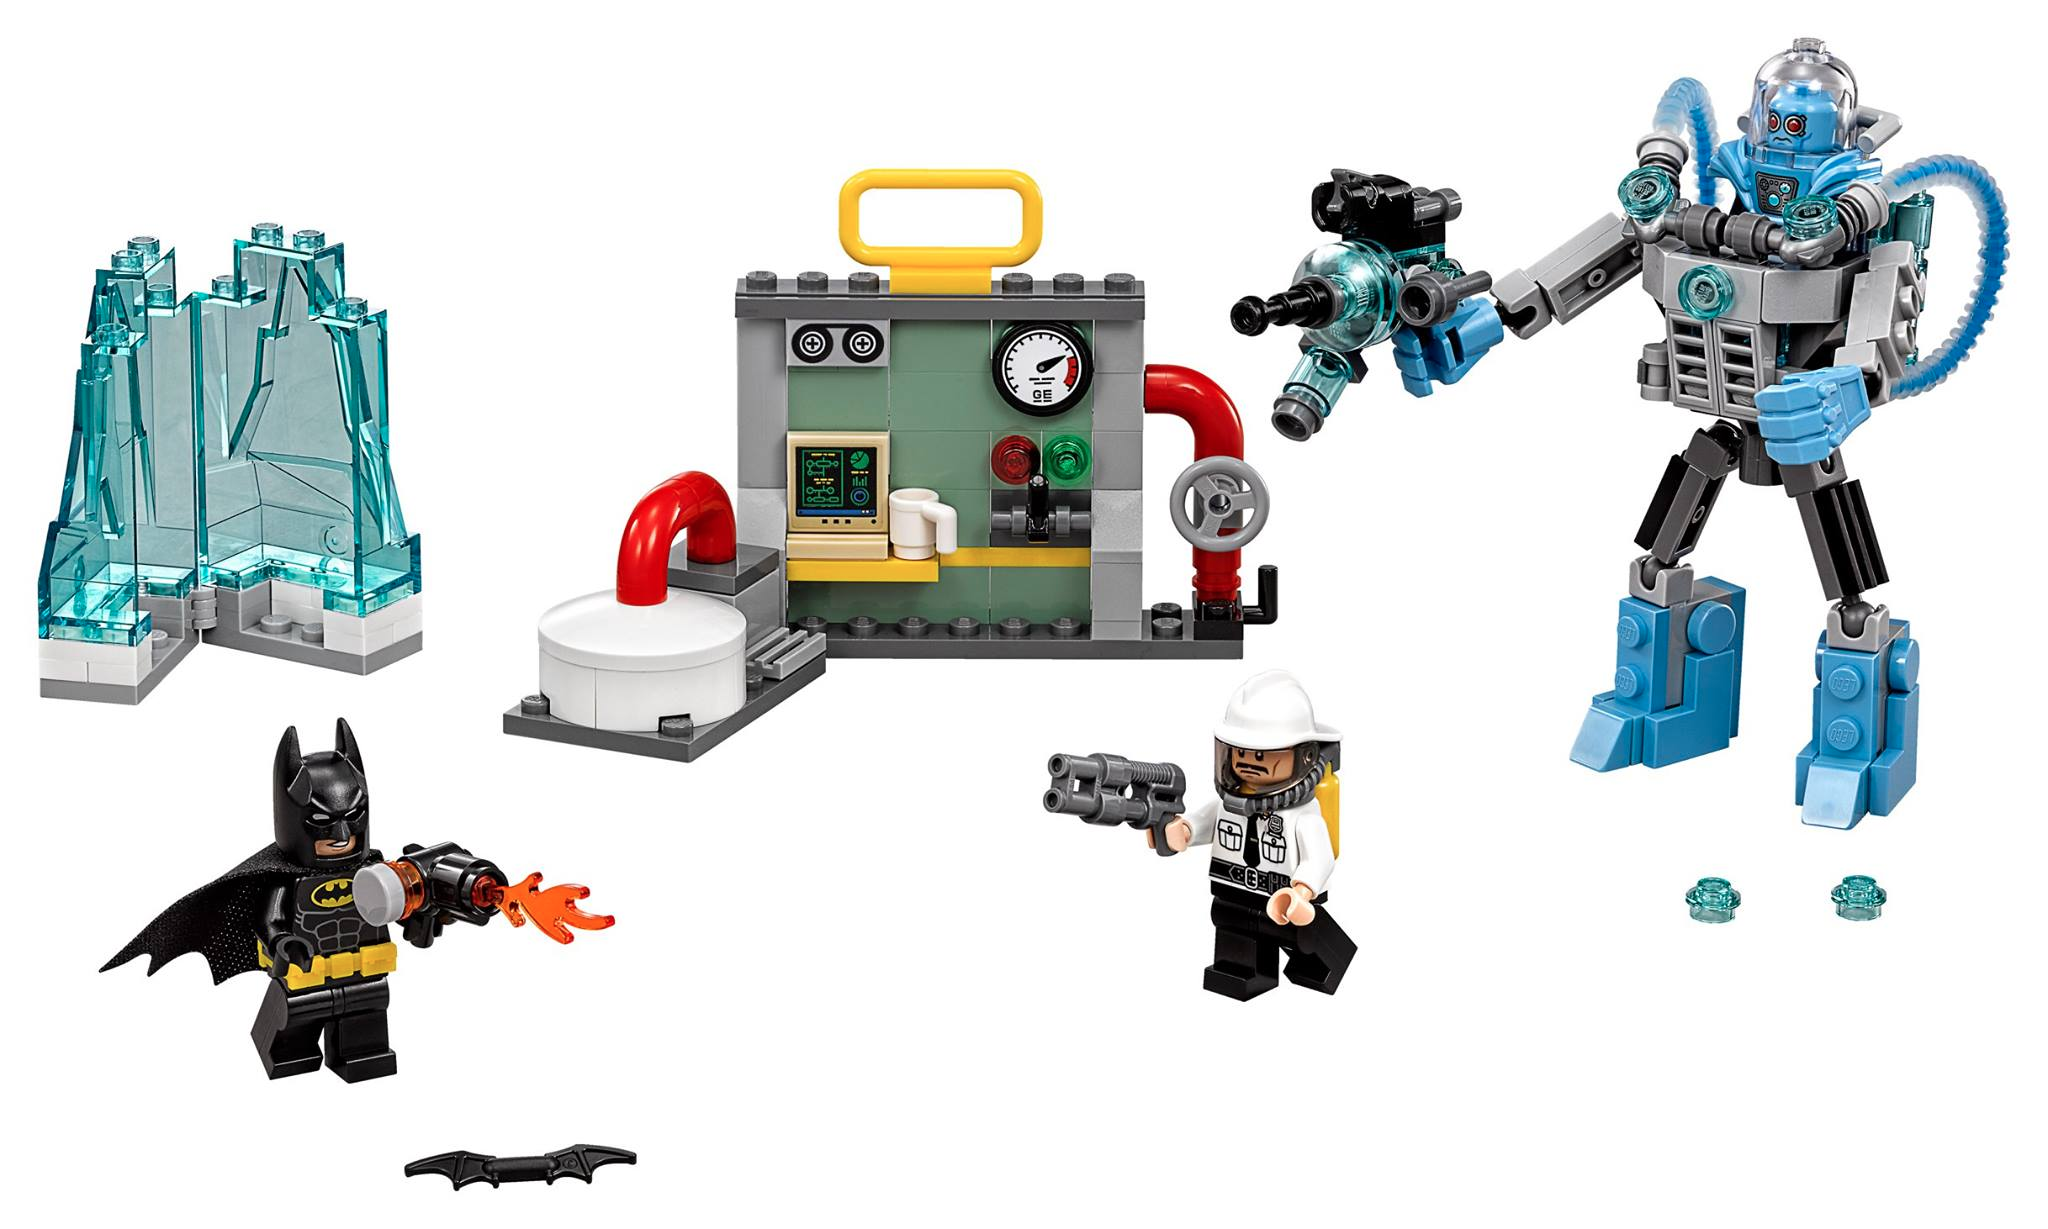 New Sets From The LEGO Batman Movie Feature Amazing Puns, Heavily Armed Penguins